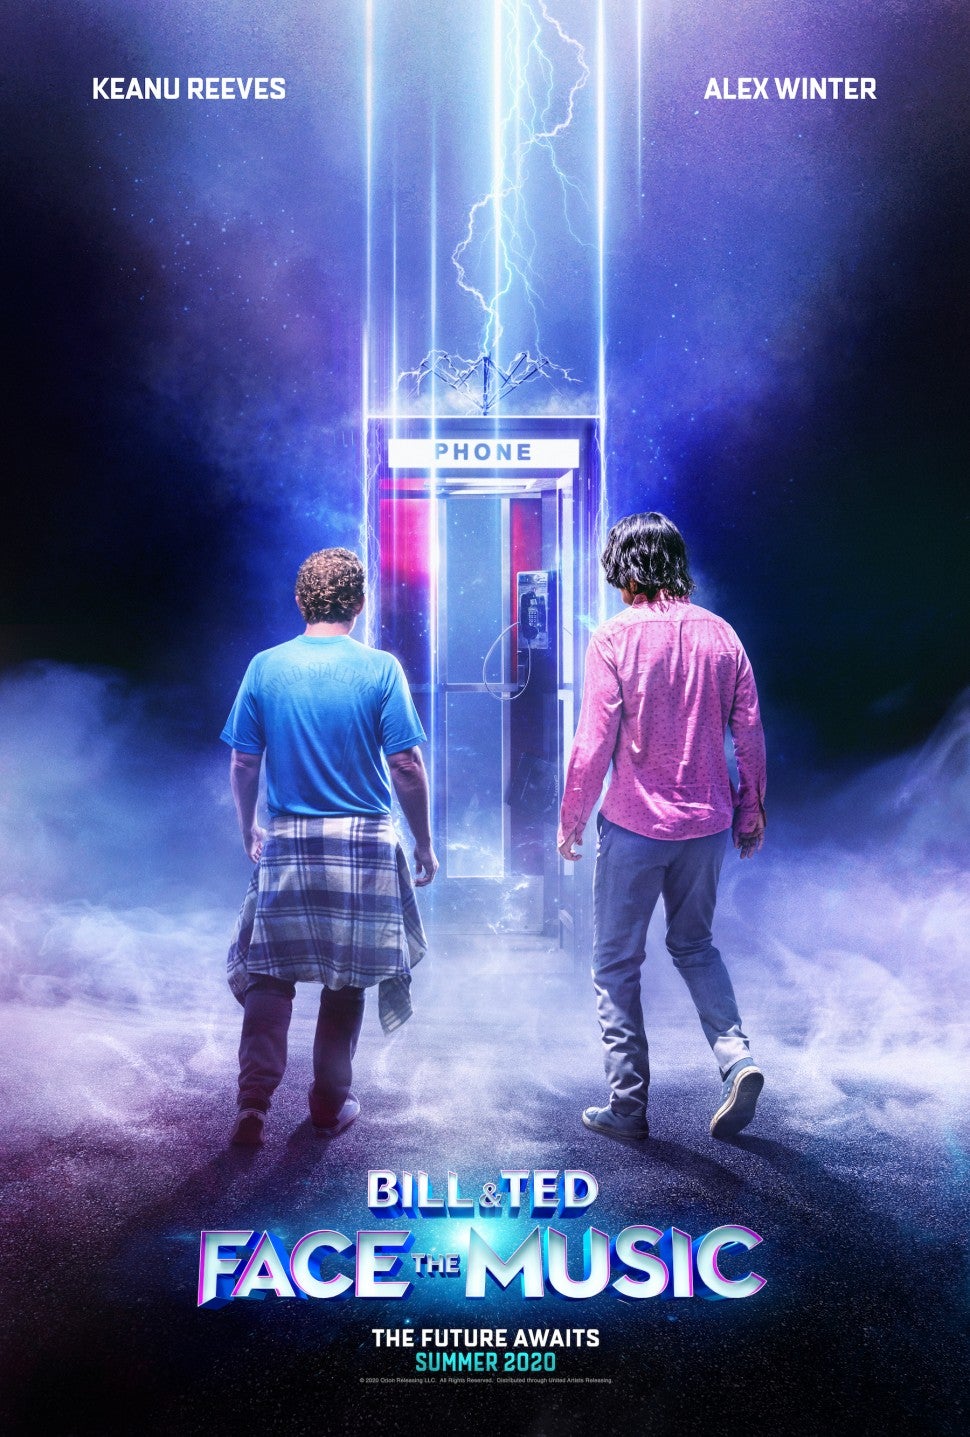 Bill Ted Face The Music Trailer Keanu Reeves And Alex Winter